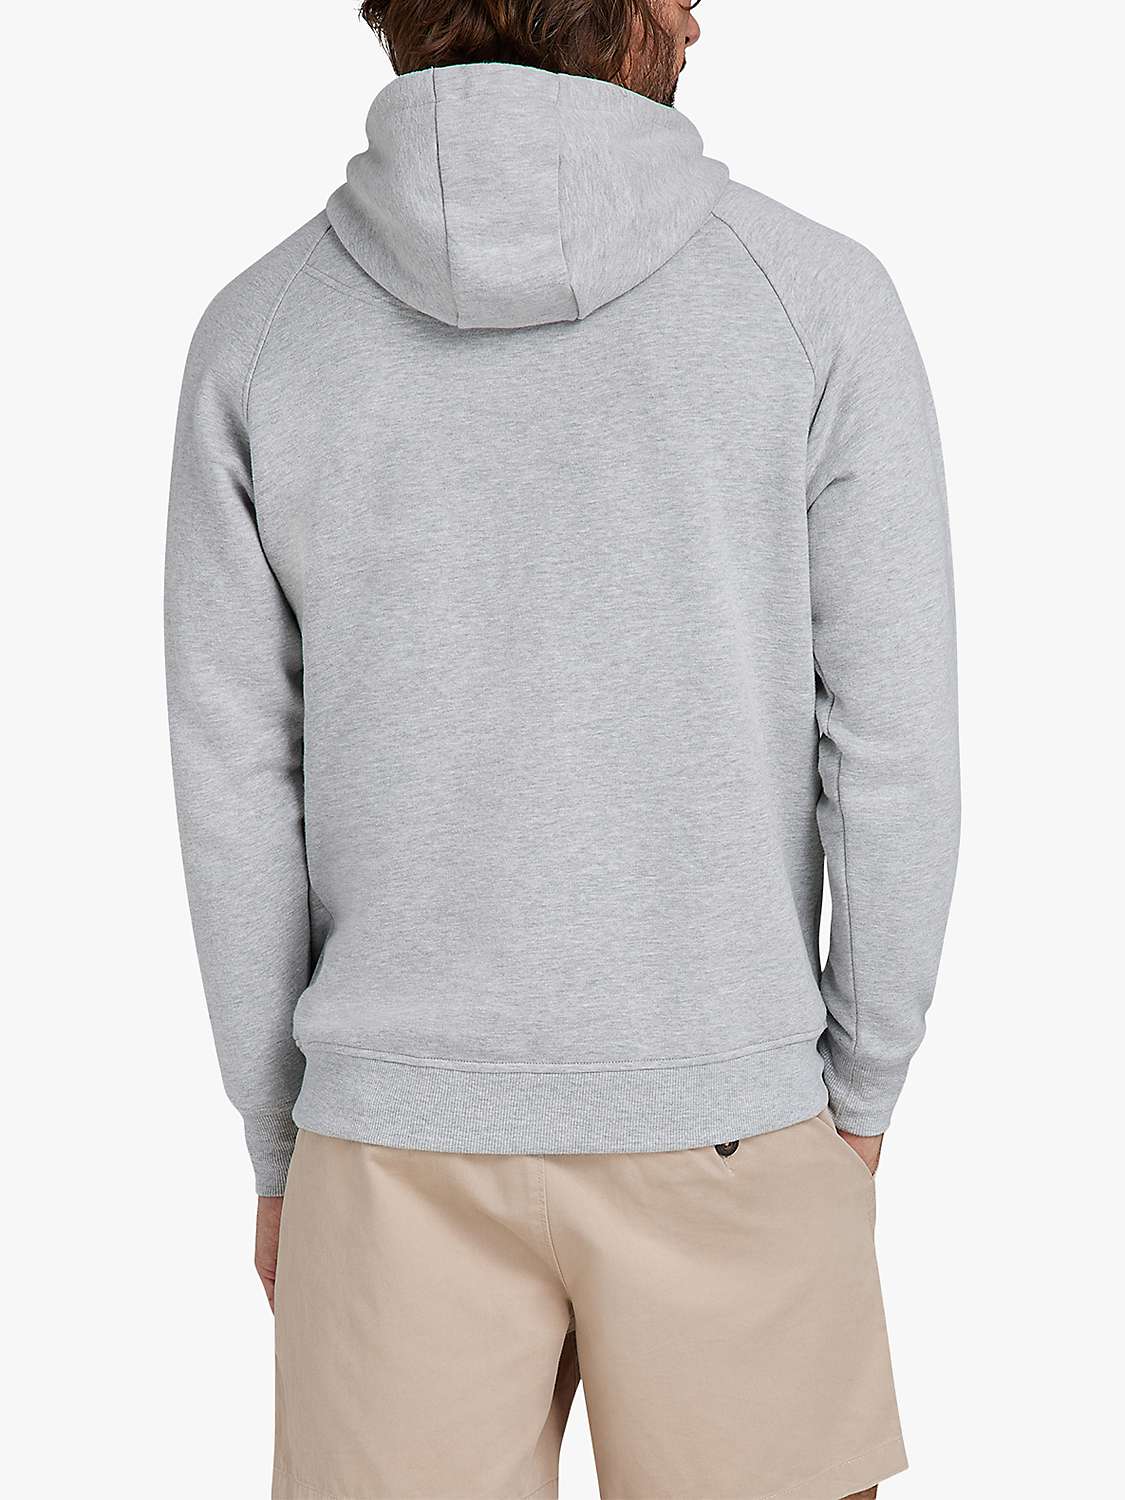 Buy Raging Bull Classic Woven Patch Overhead Hoodie, Grey Marl Online at johnlewis.com